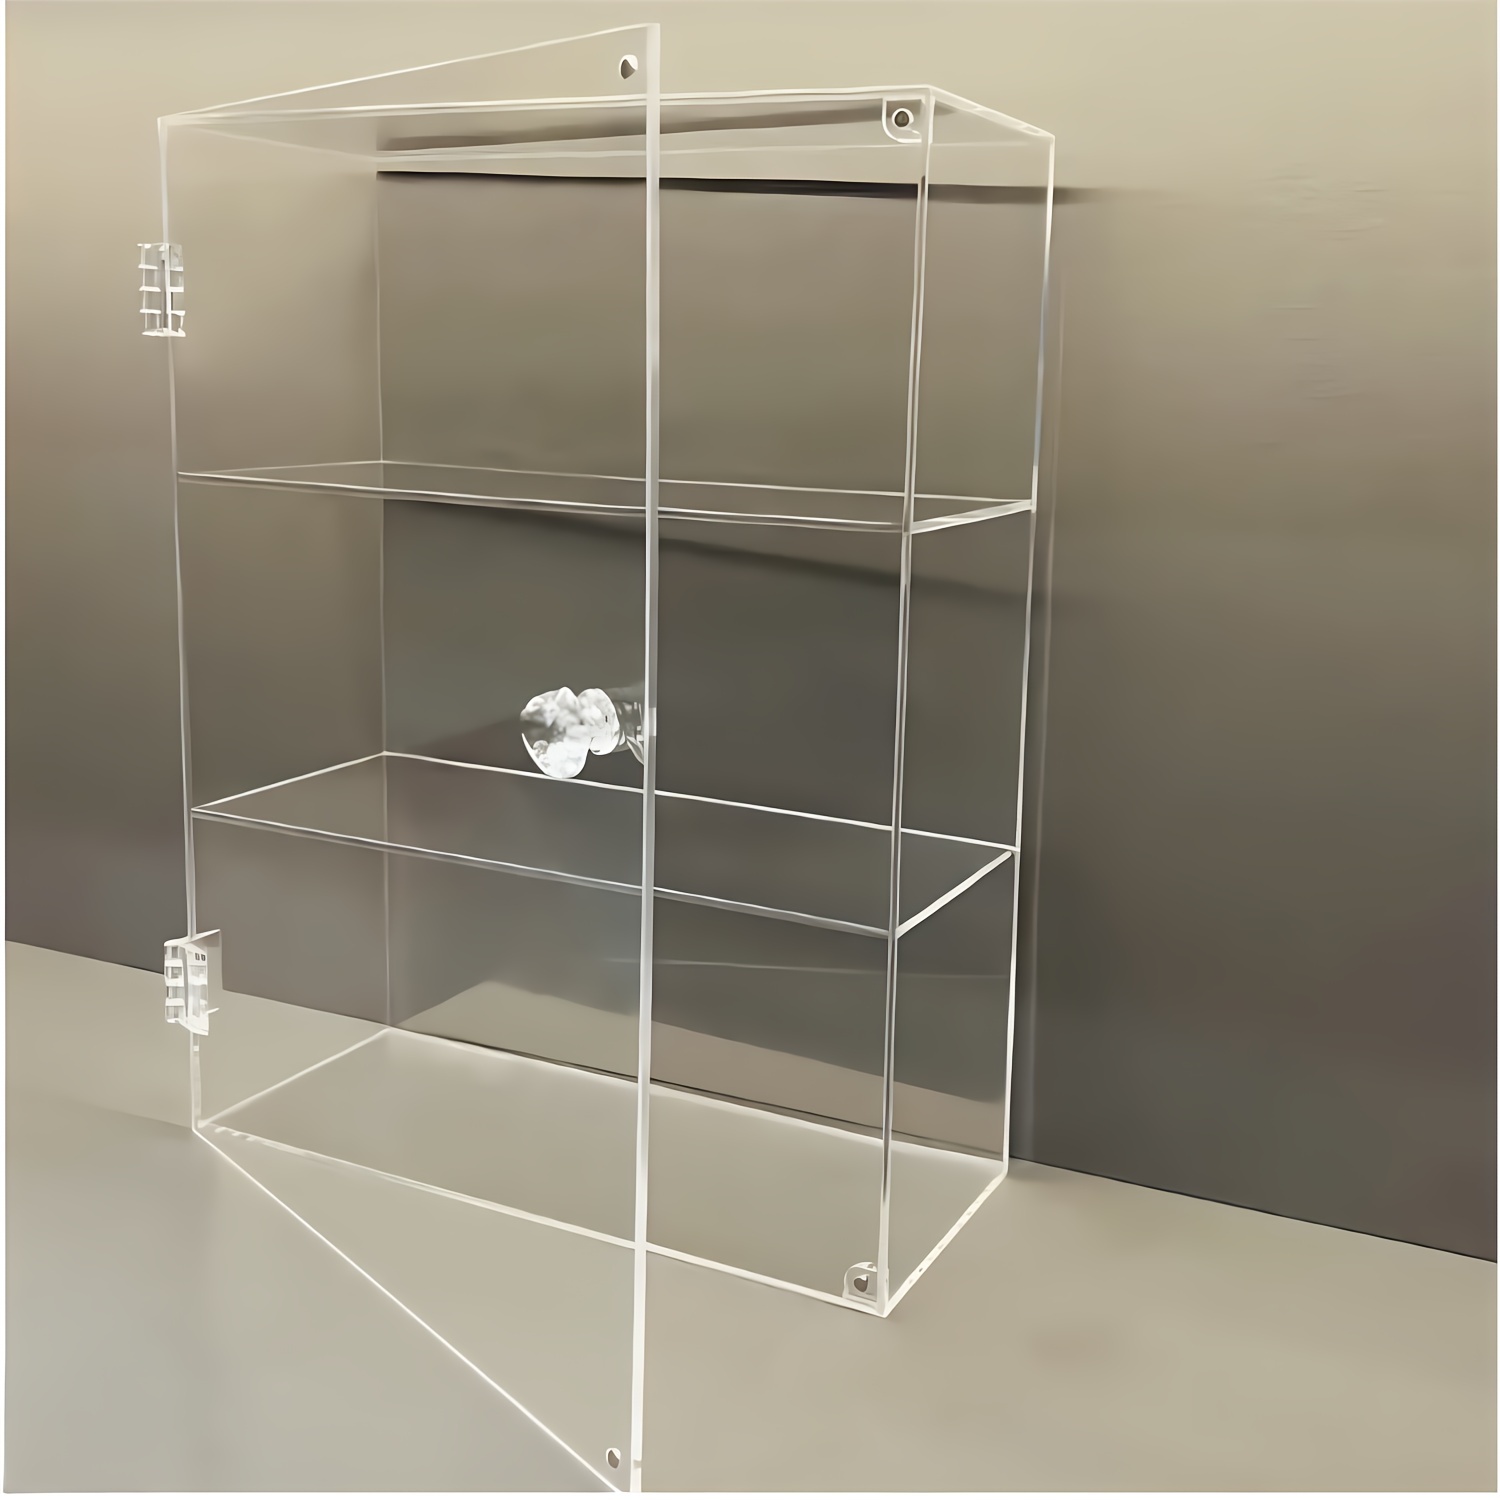 1pc acrylic dustproof display box cabinet anime model display rack storage box for home room living room office decor for valentines day new year easter party decor